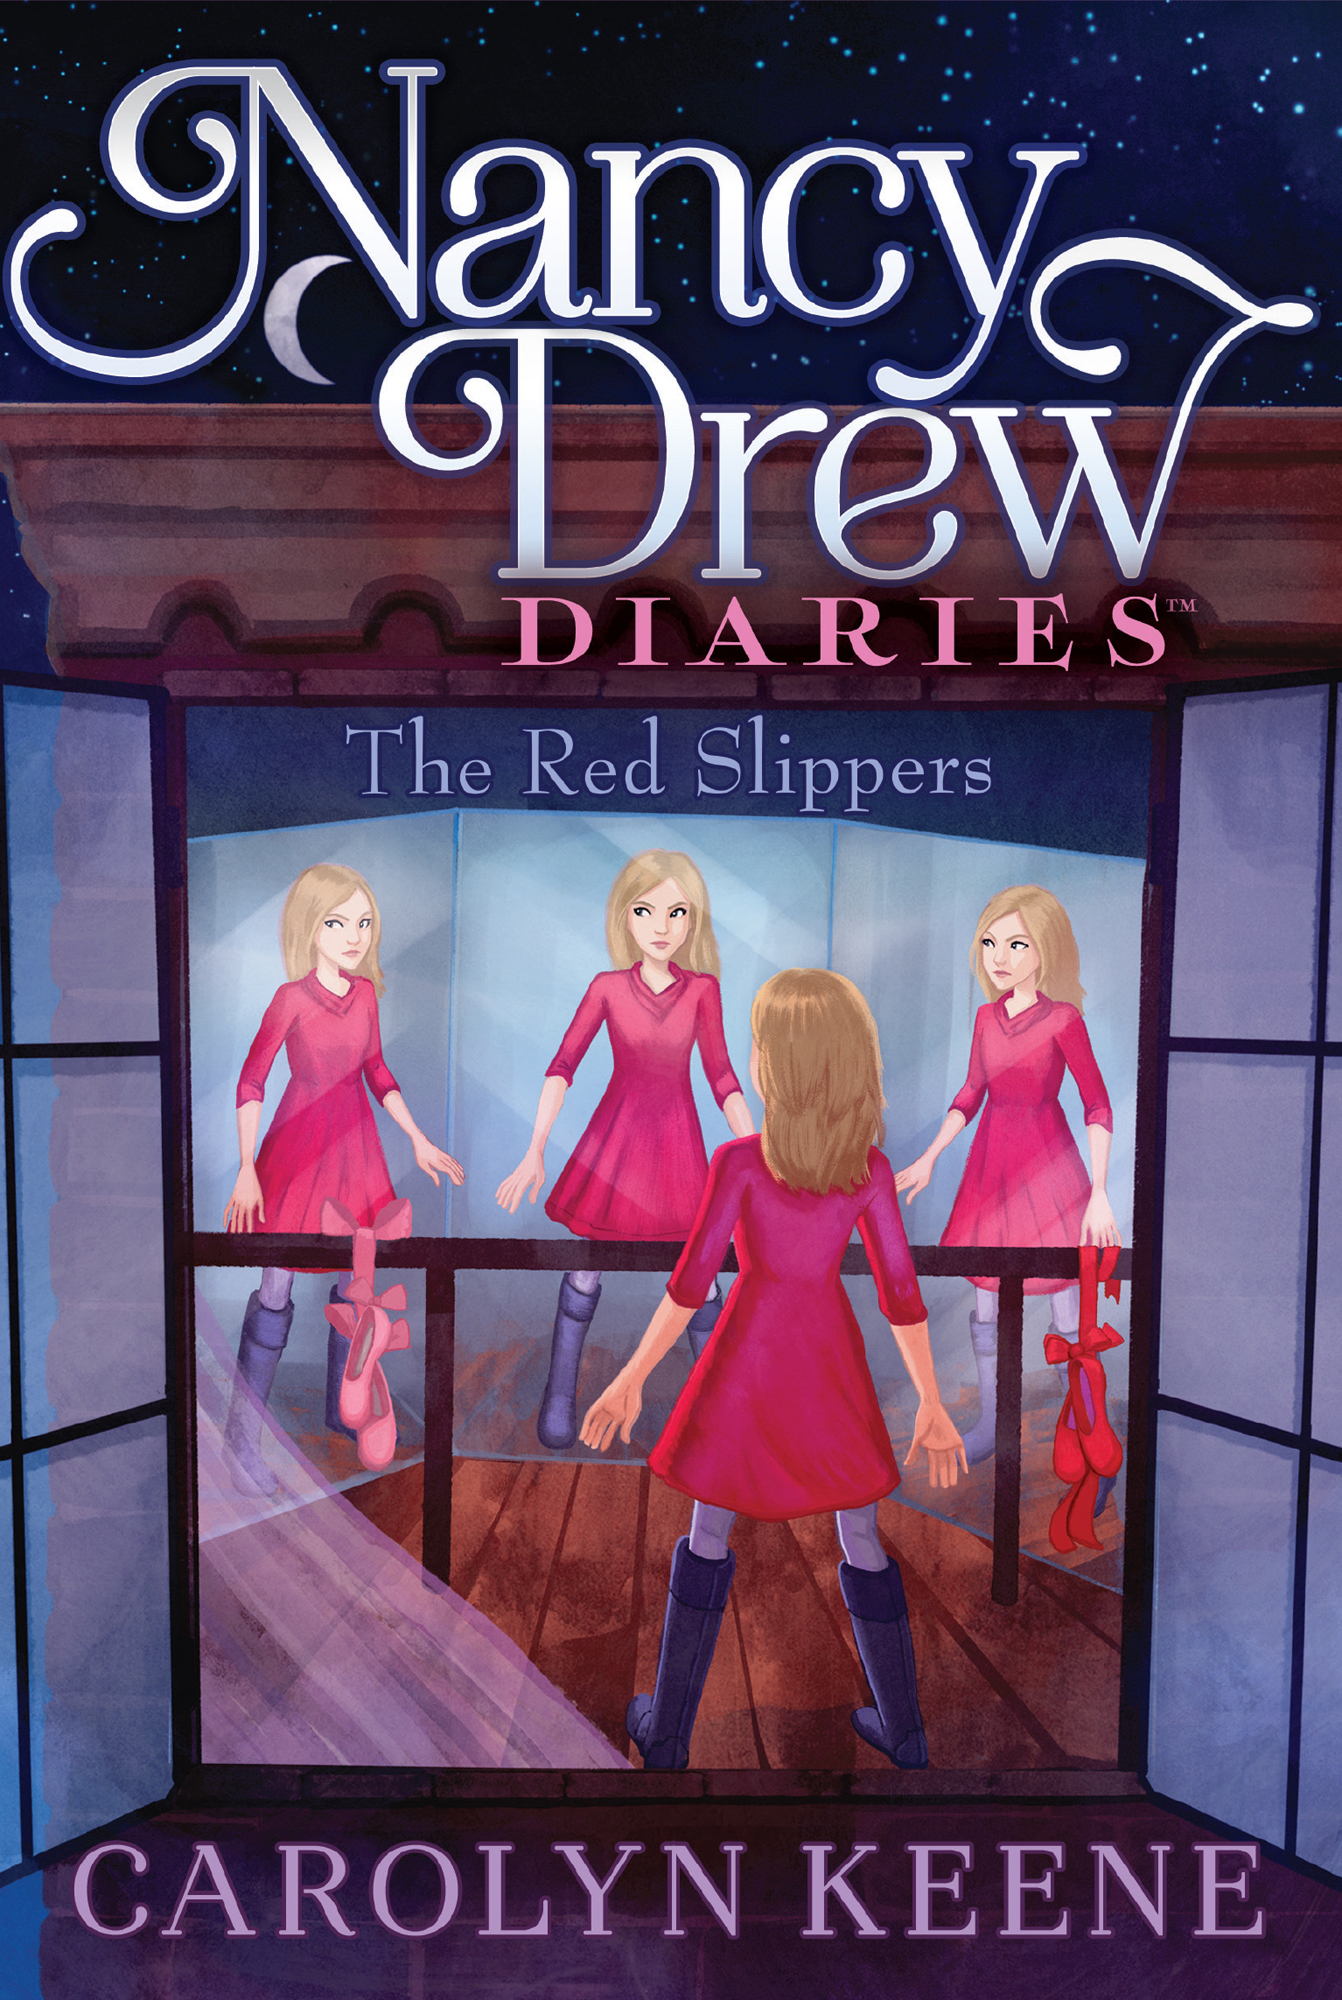 The Red Slippers by Carolyn Keene